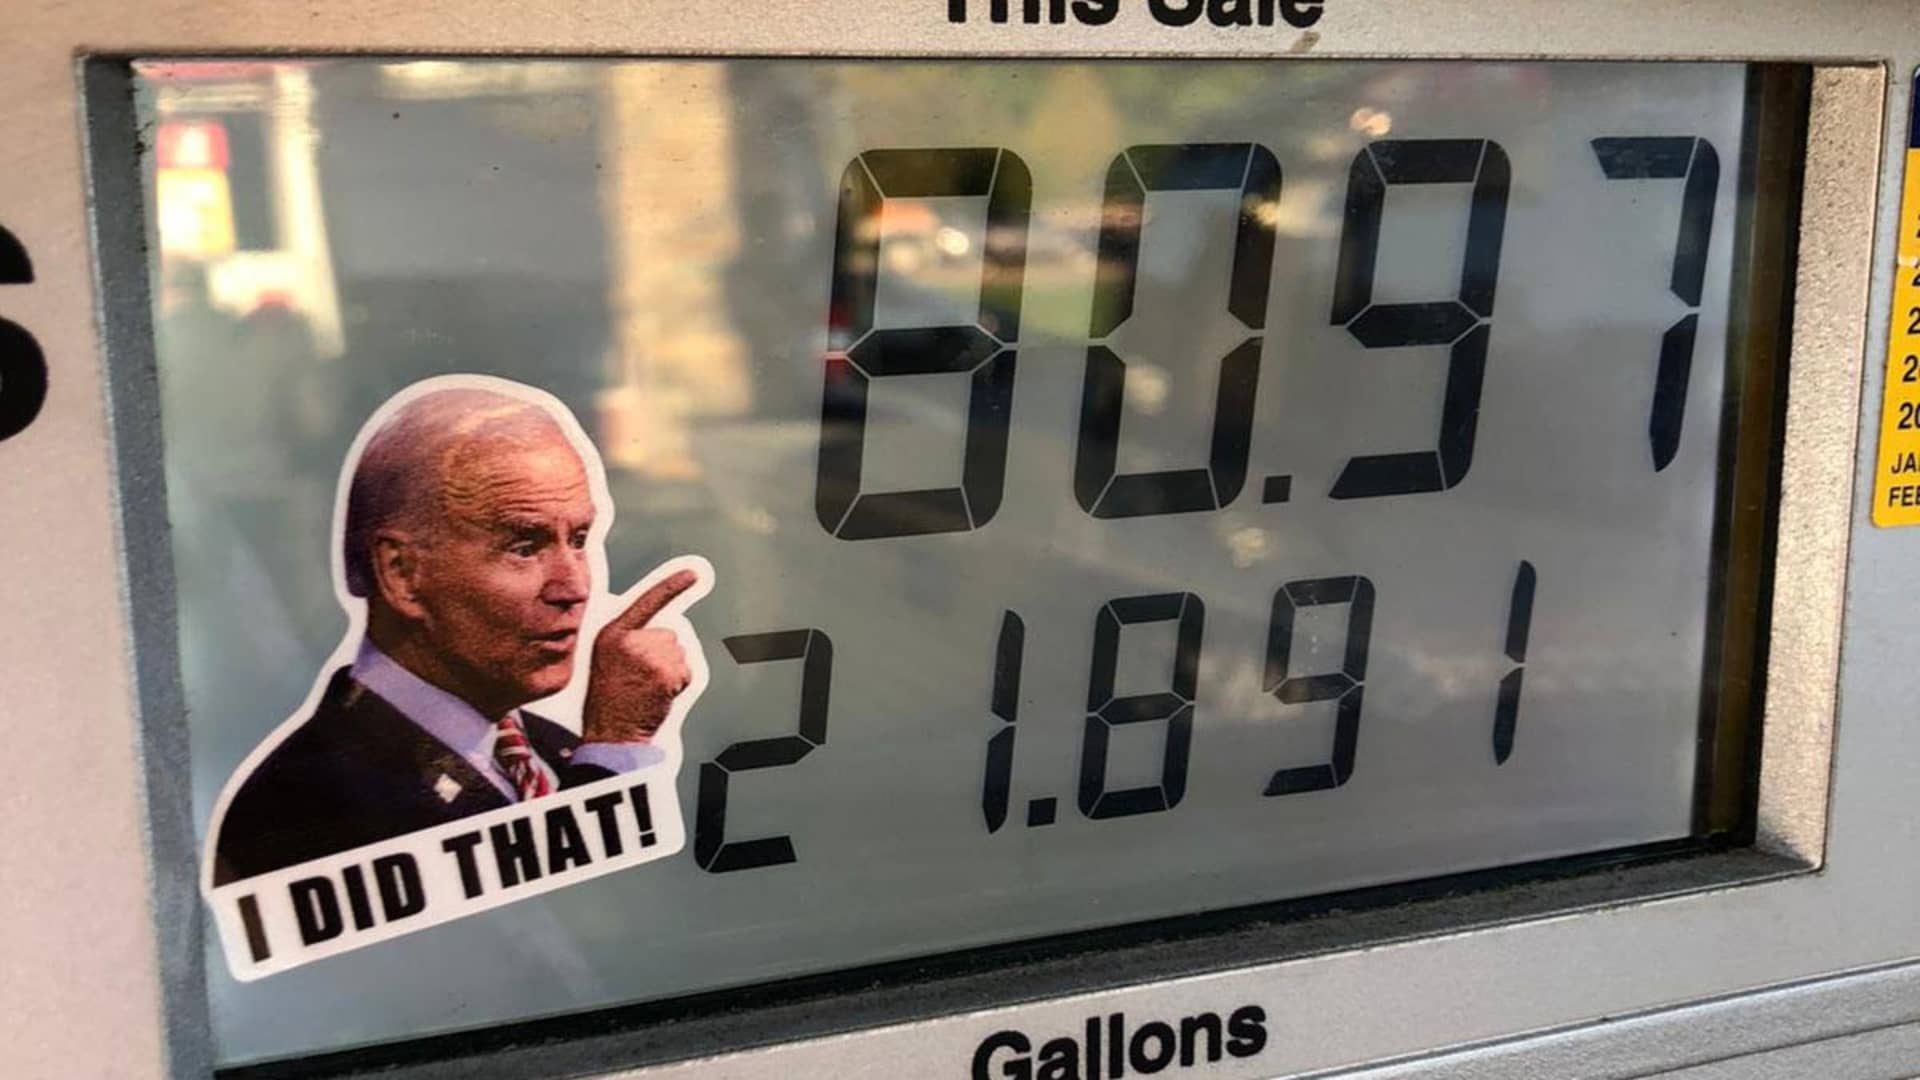 At a Wawa gas station in Claymont, Delaware - Biden's childhood home - a sticker affixed to the kiosk shows the president pointing and smiling at the total price of the purchase.